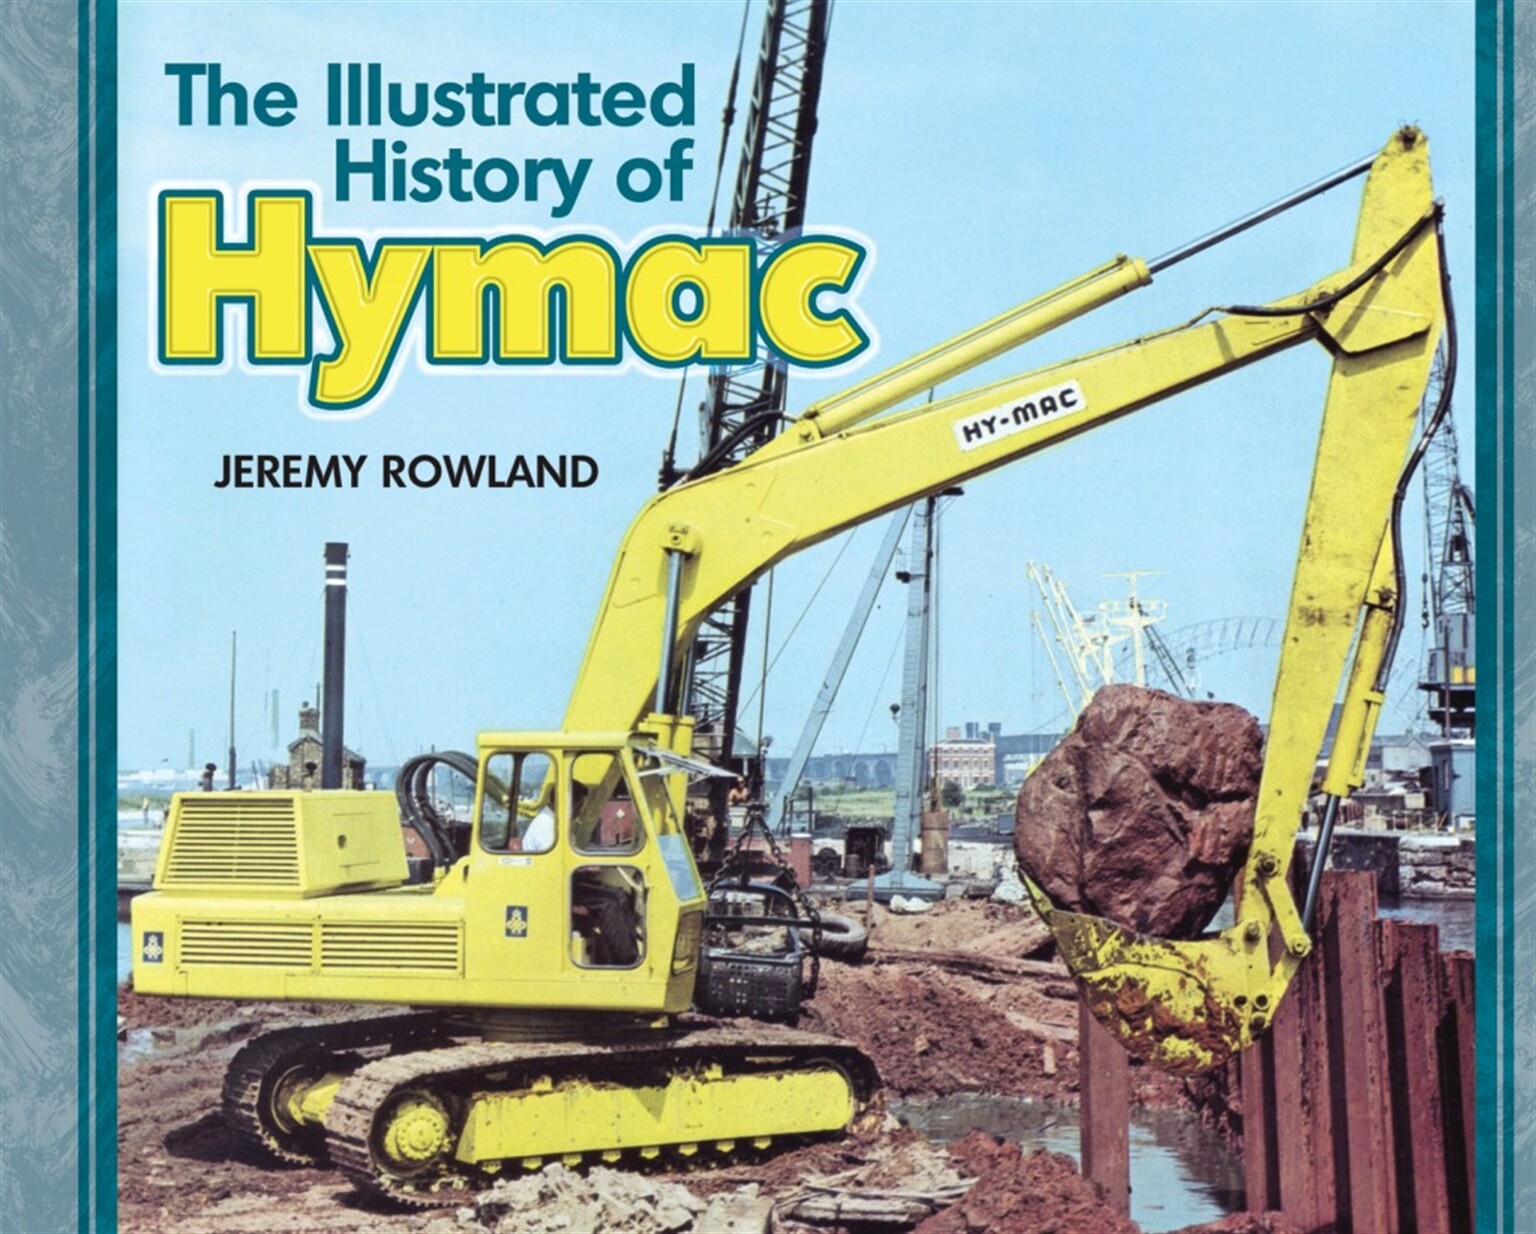 Hymac the definitive history is put down in print